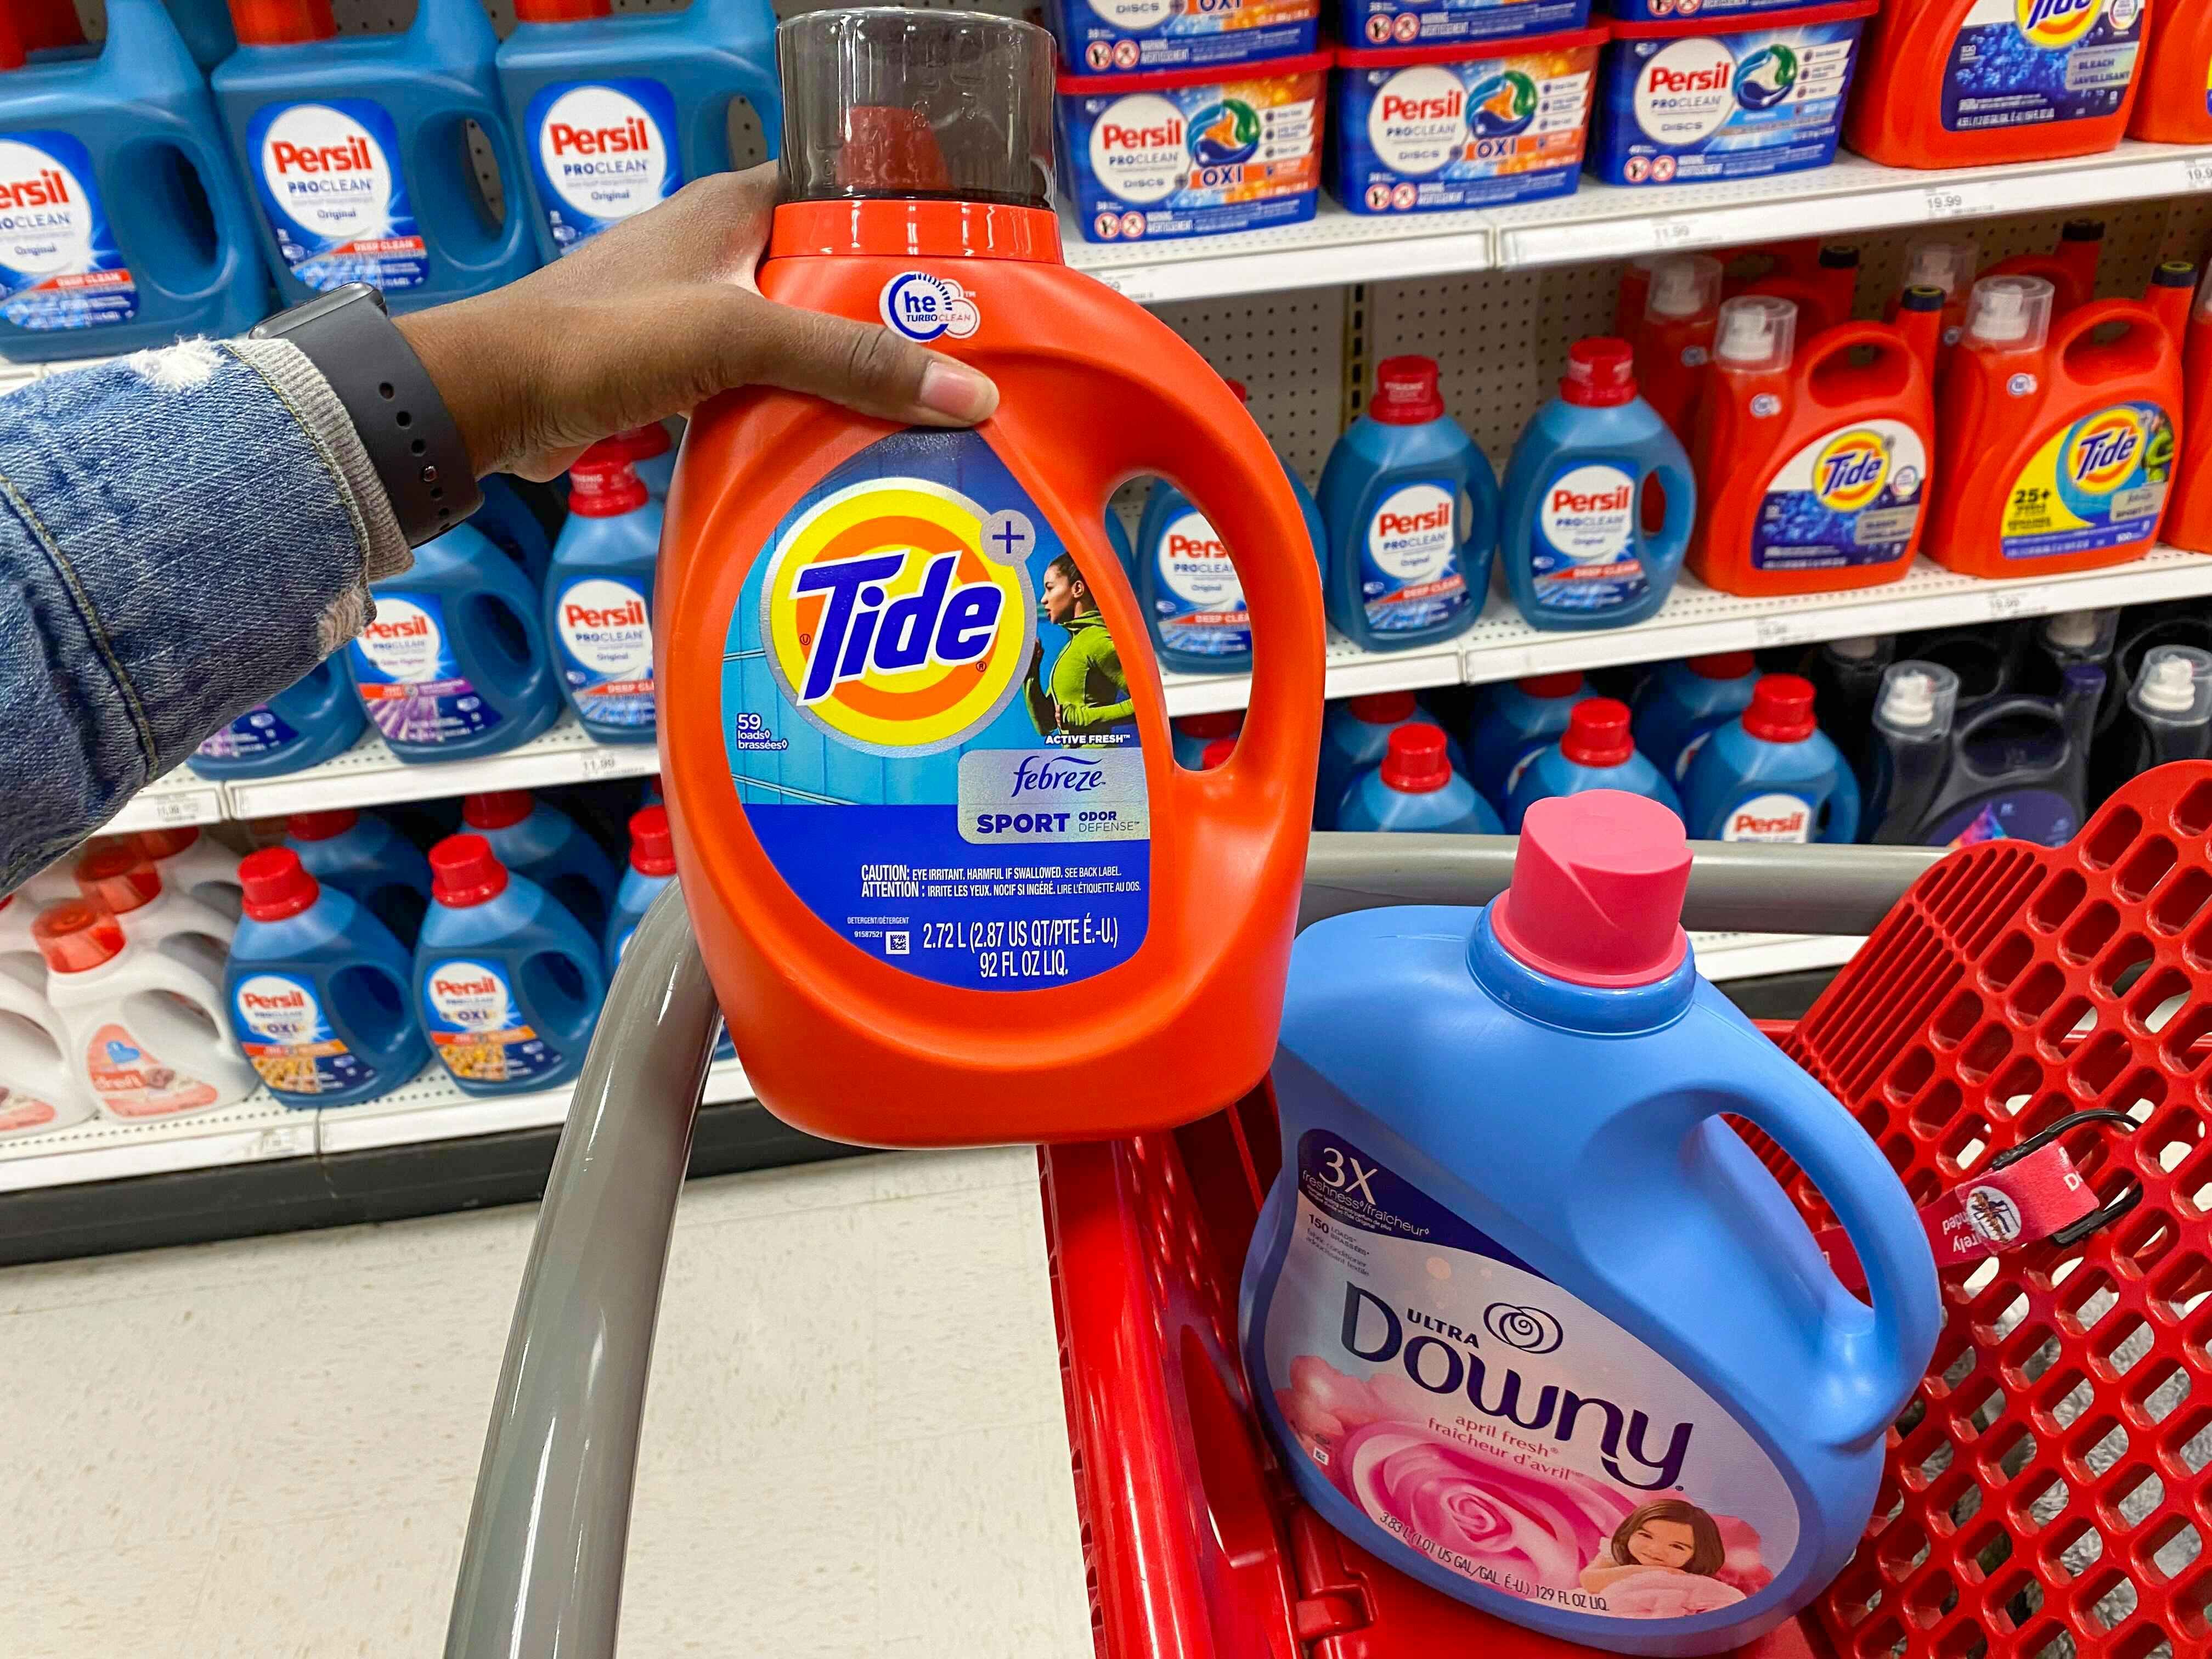 hand holding up Tide detergent over Target shopping cart that has a bottle of Downy in it